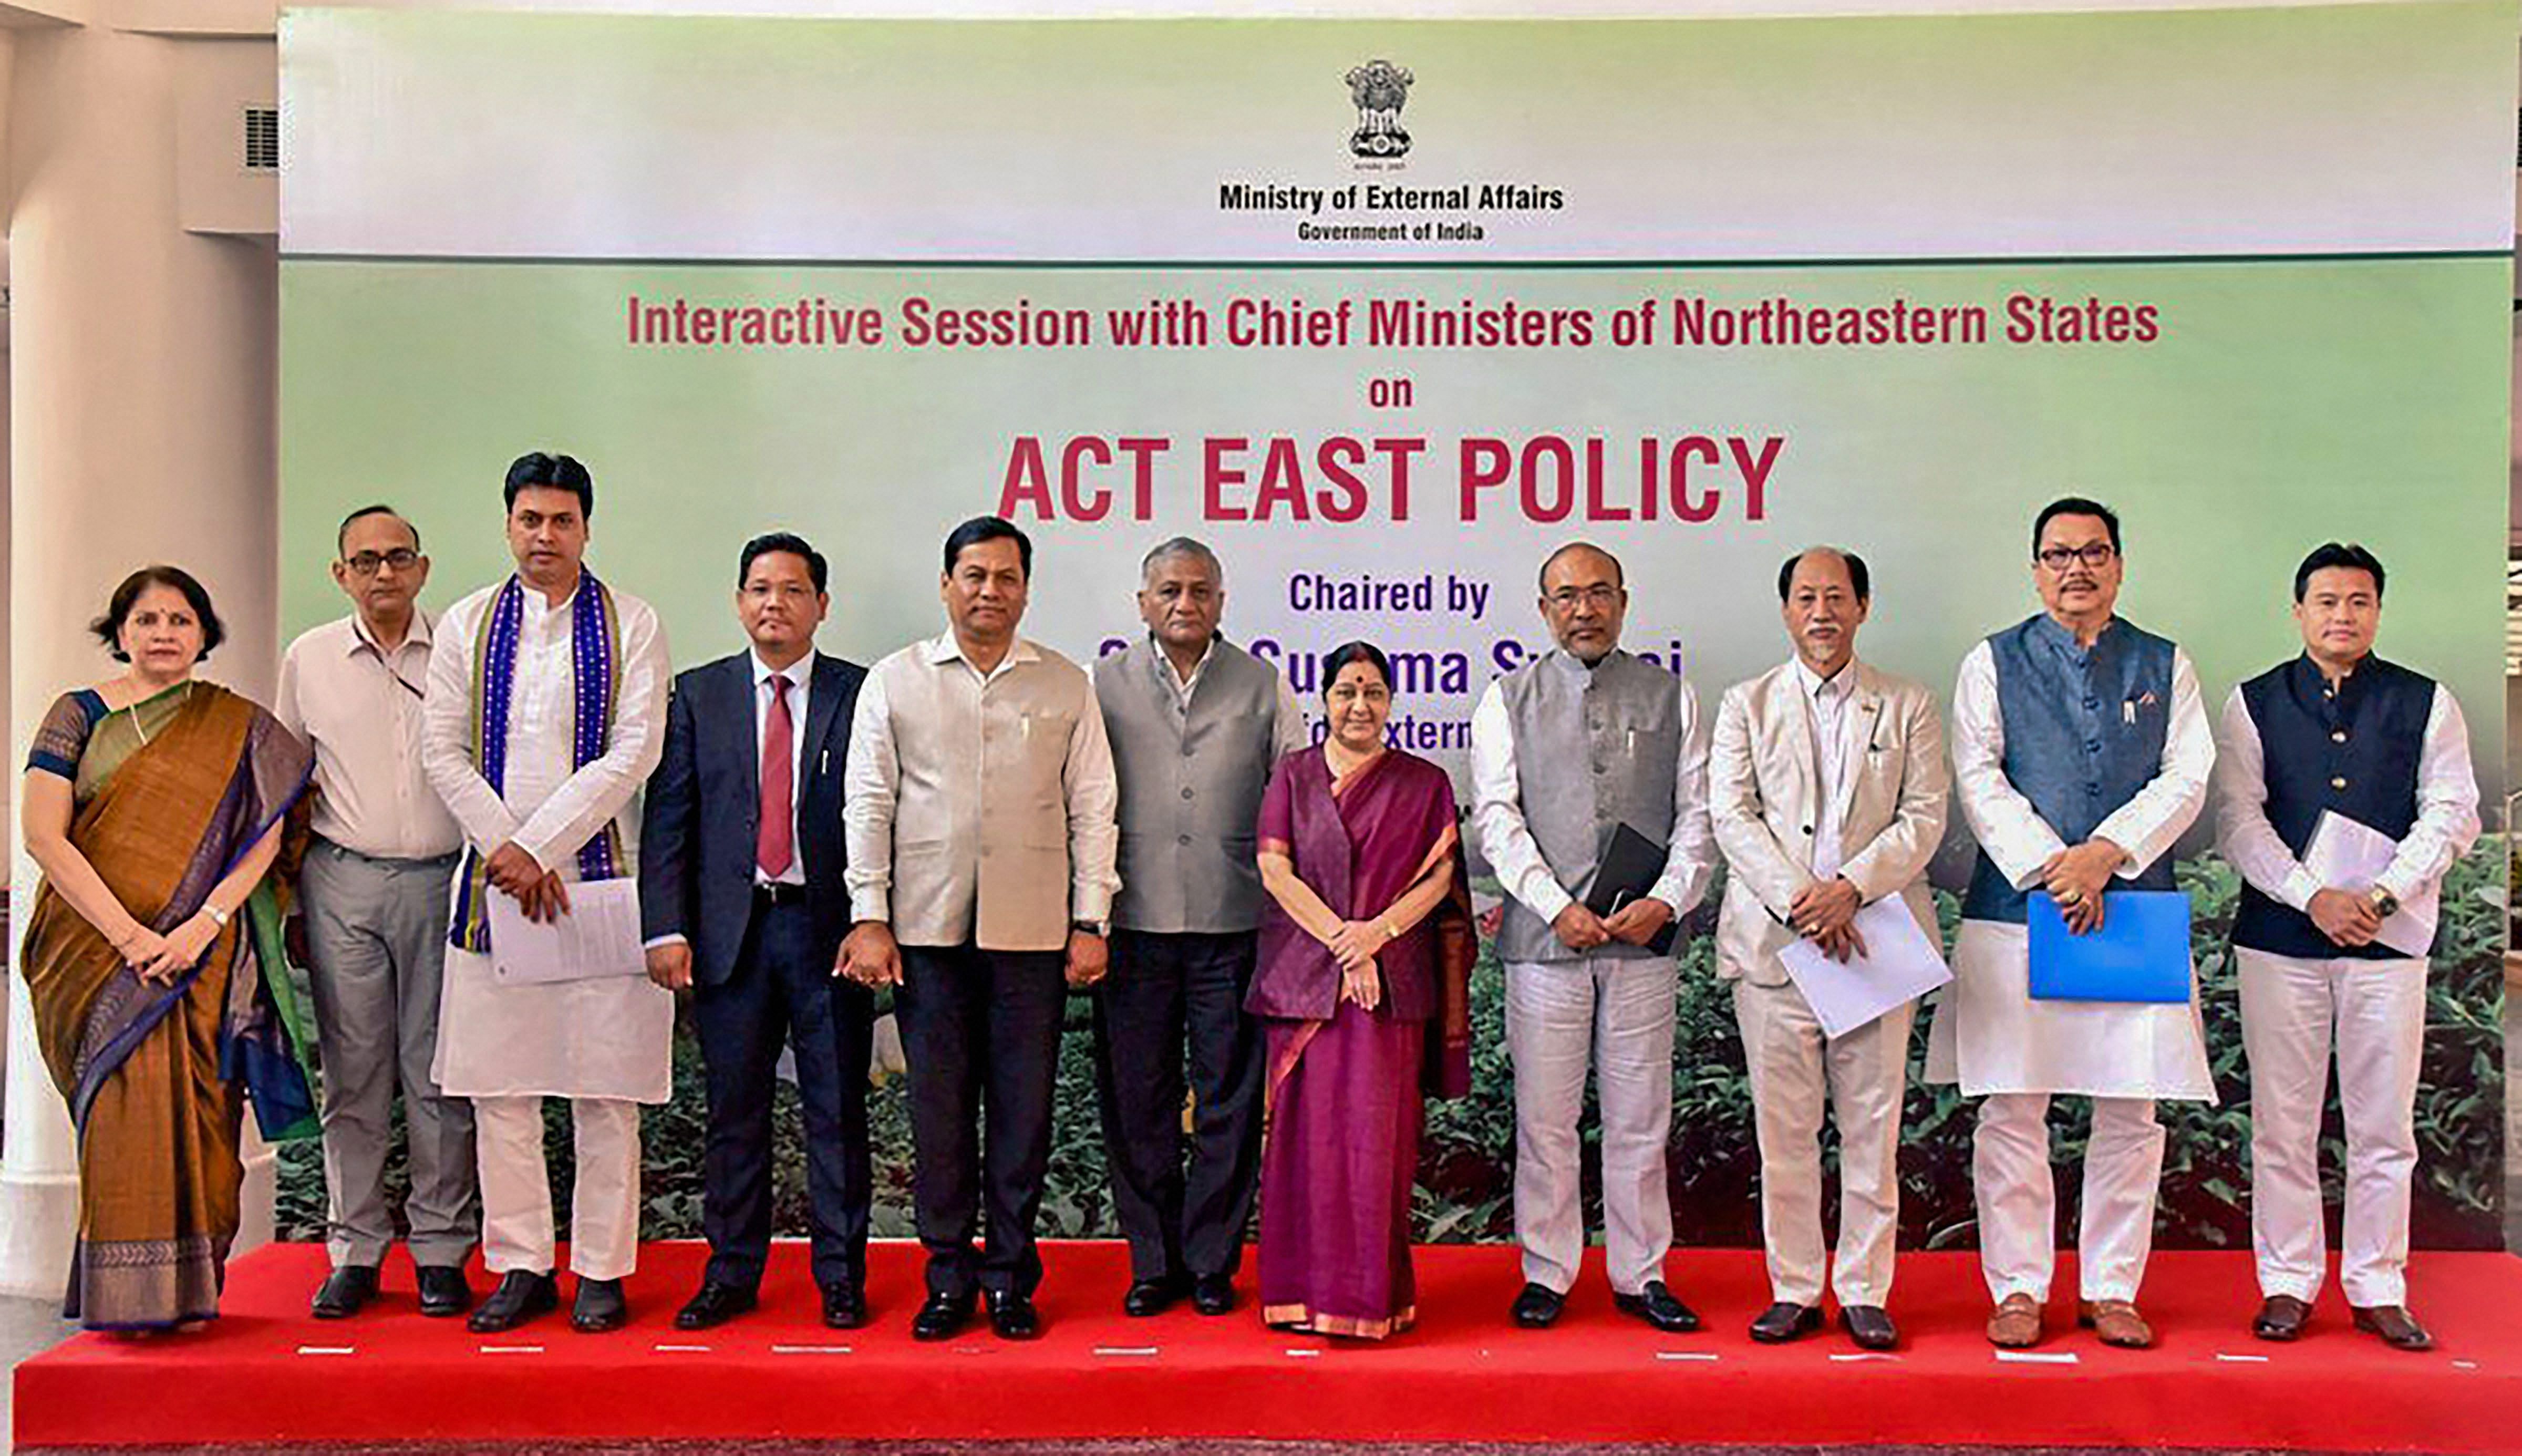 Union External Affairs Minister Sushma Swaraj along with Union Minister of State for Development of North Eastern Region (DoNER) Dr Jitendra Singh with the chief minister of Northeastern States after an interactive session with them on 'Act East Policy' in New Delhi on Friday. PTI 